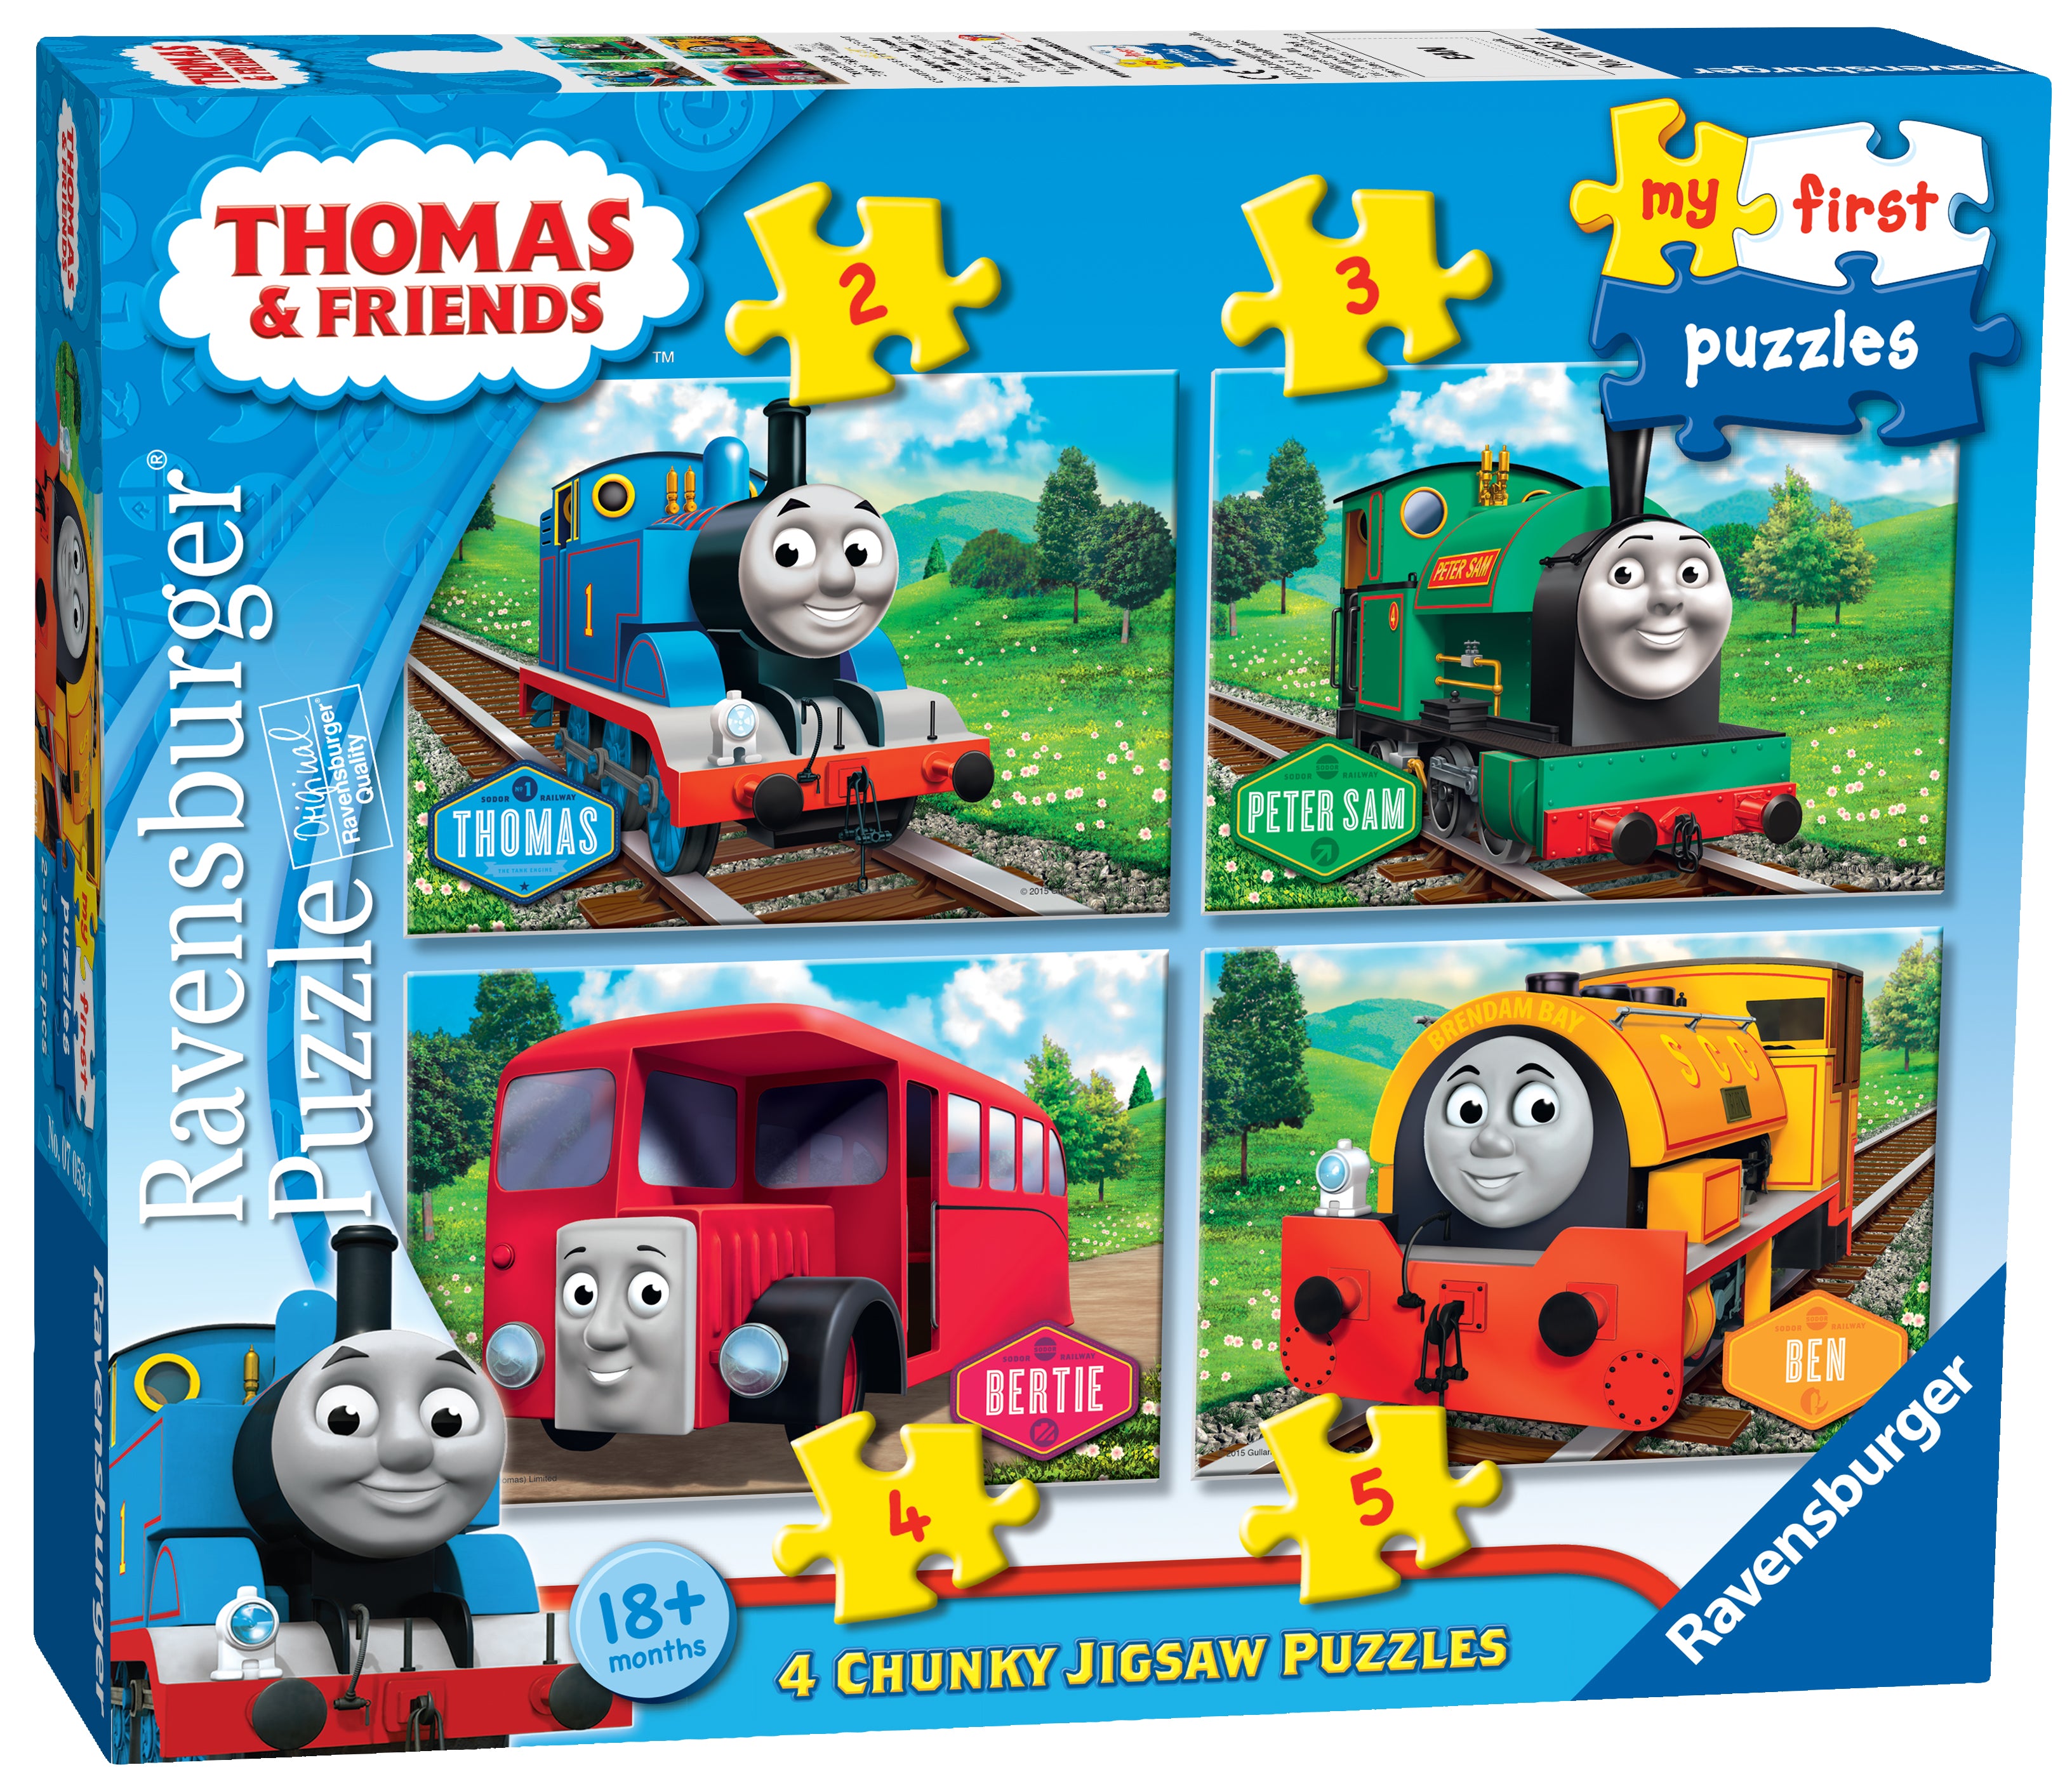 Thomas & Friends My First Puzzles (2,3,4,5pc)